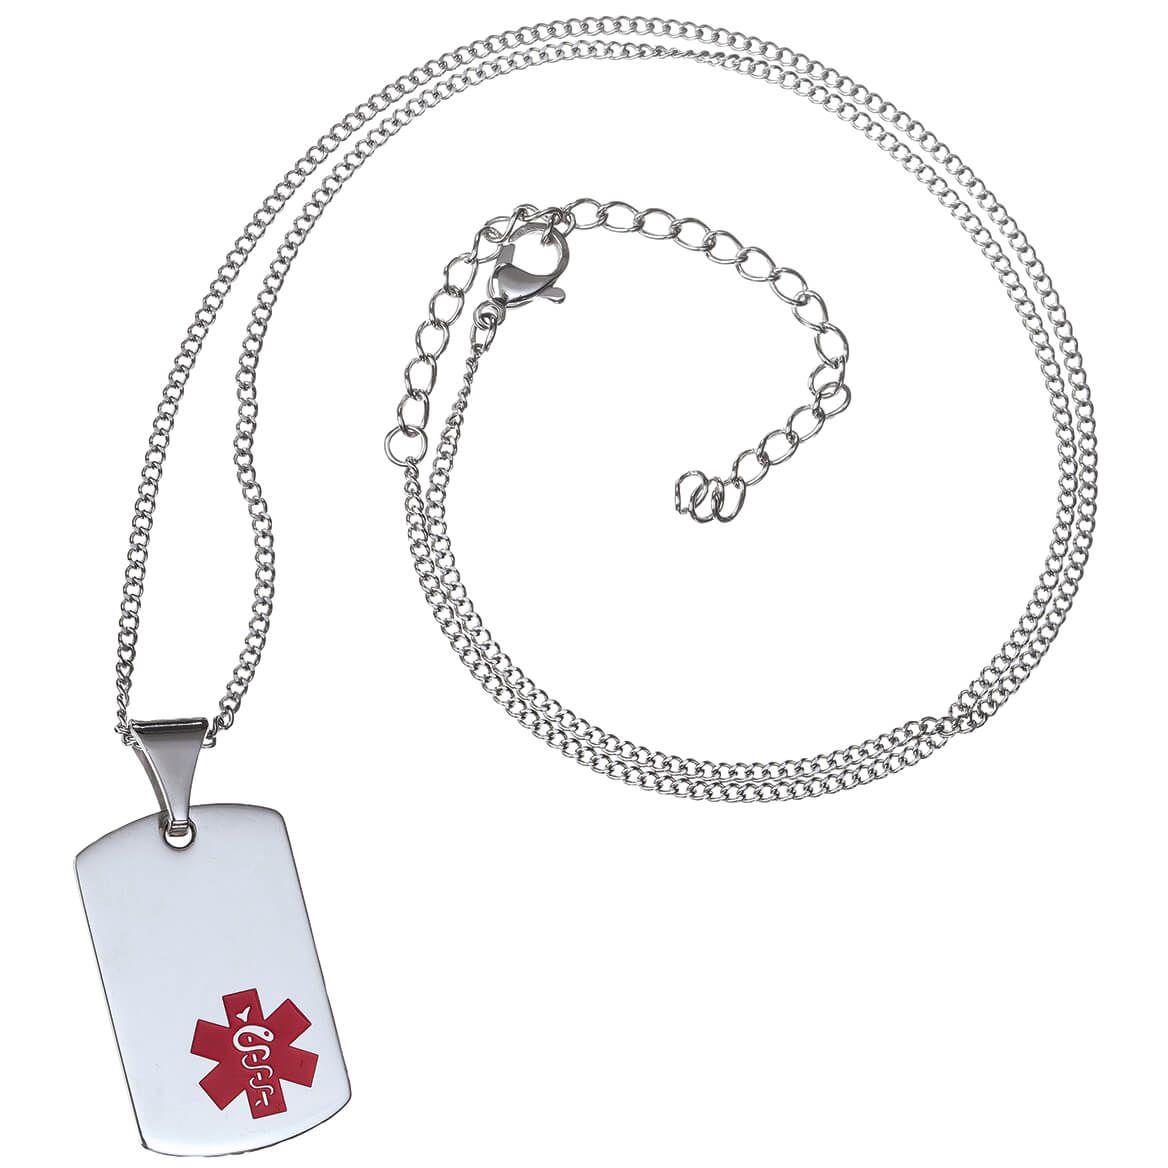 Personalized Medical ID Tag Necklace + '-' + 369366